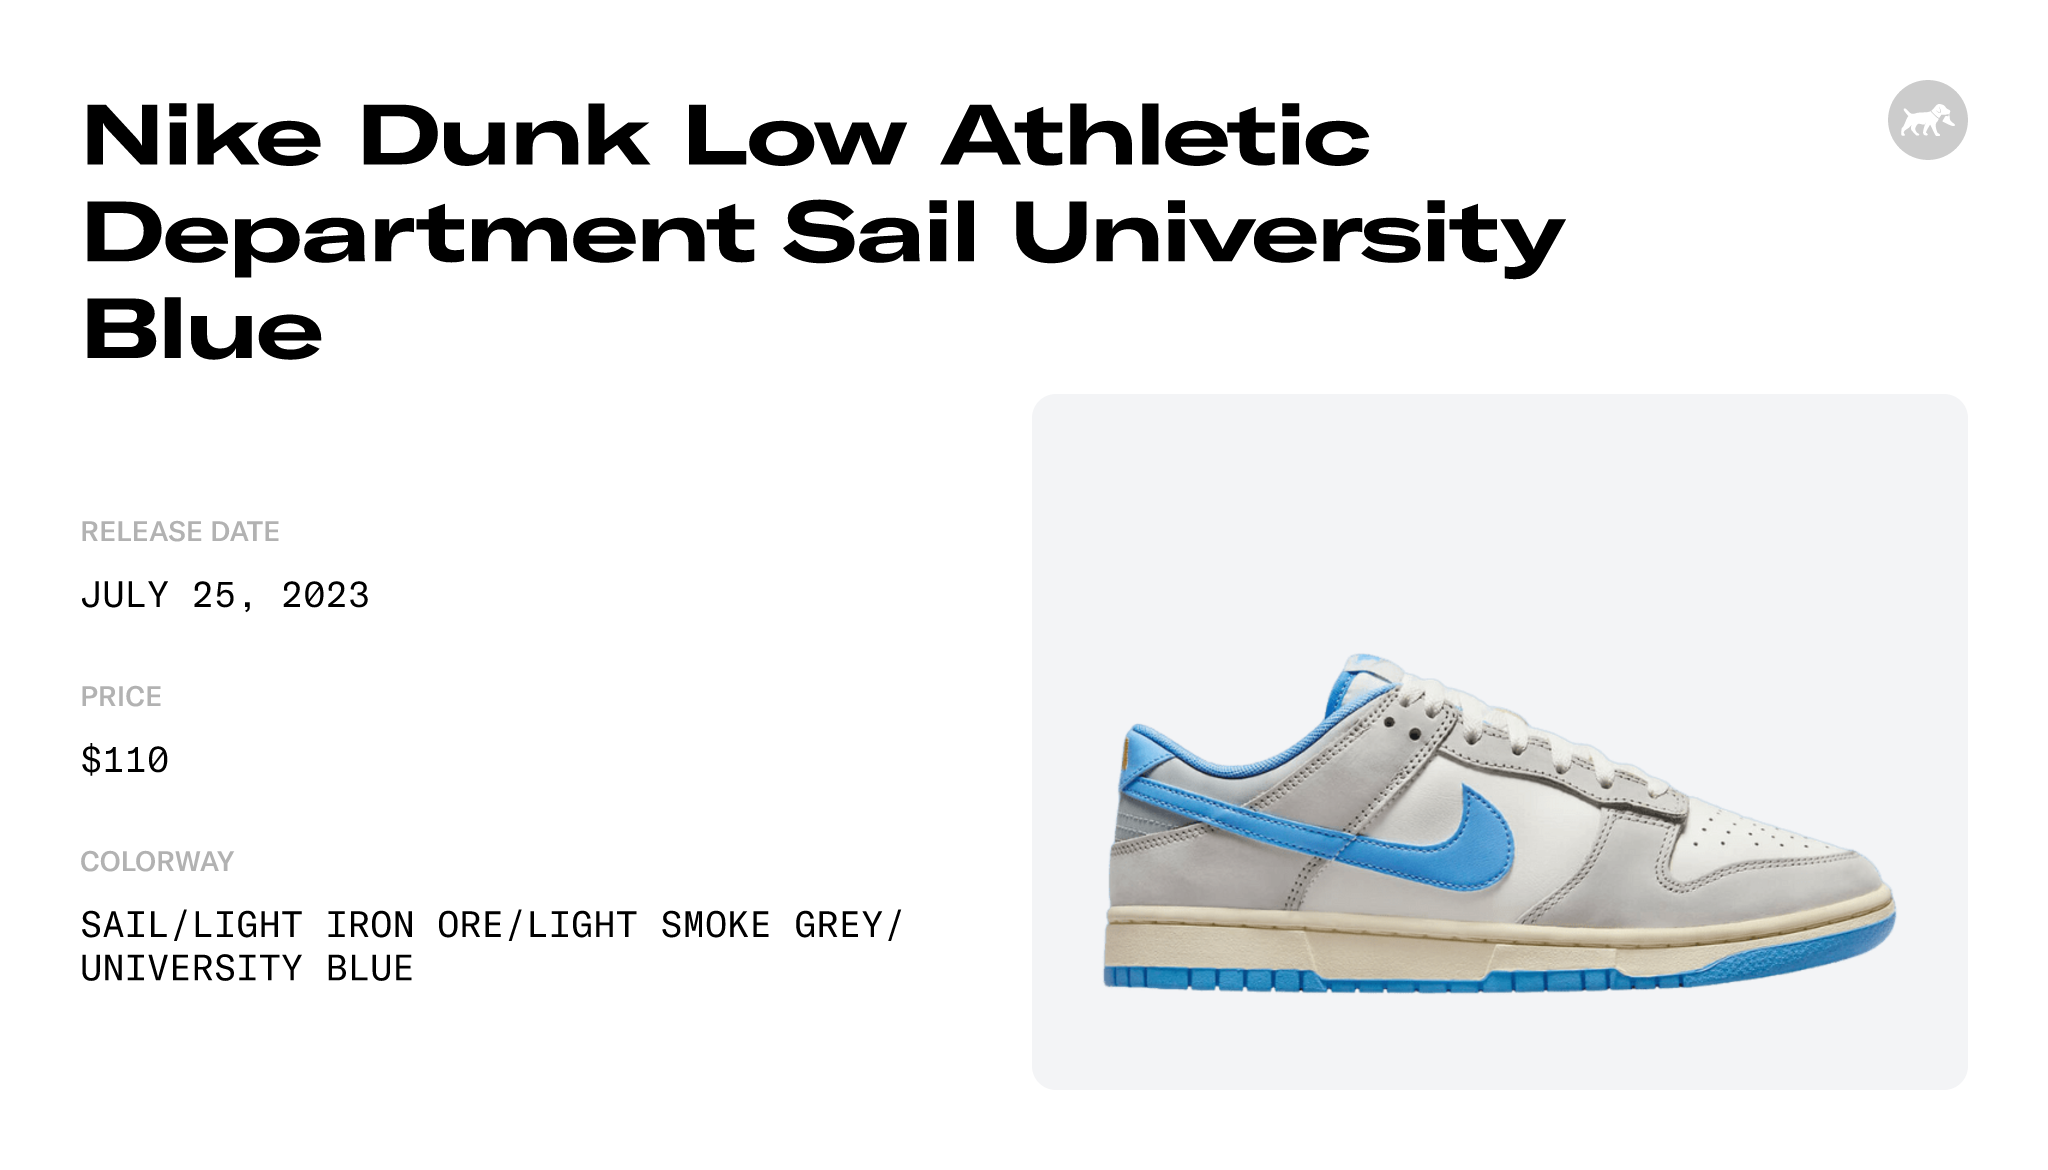 The Nike Dunk Low Athletic Department Sail University Blue Releases July 25